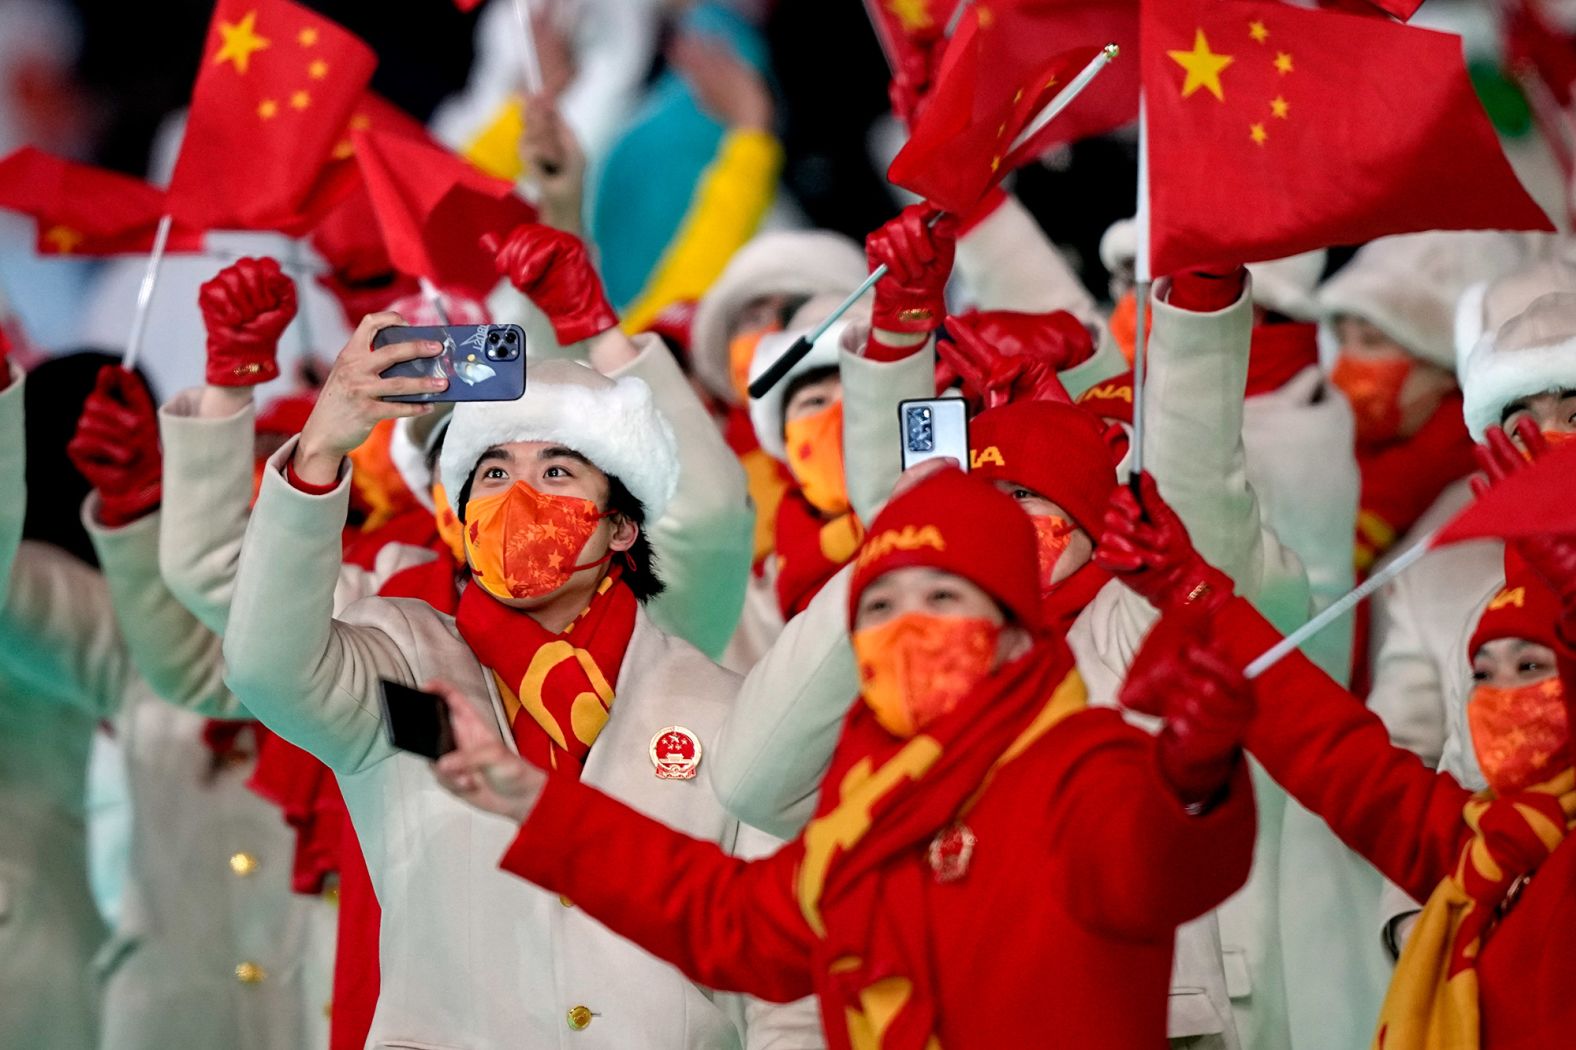 China's team enters the stadium during the parade of nations.